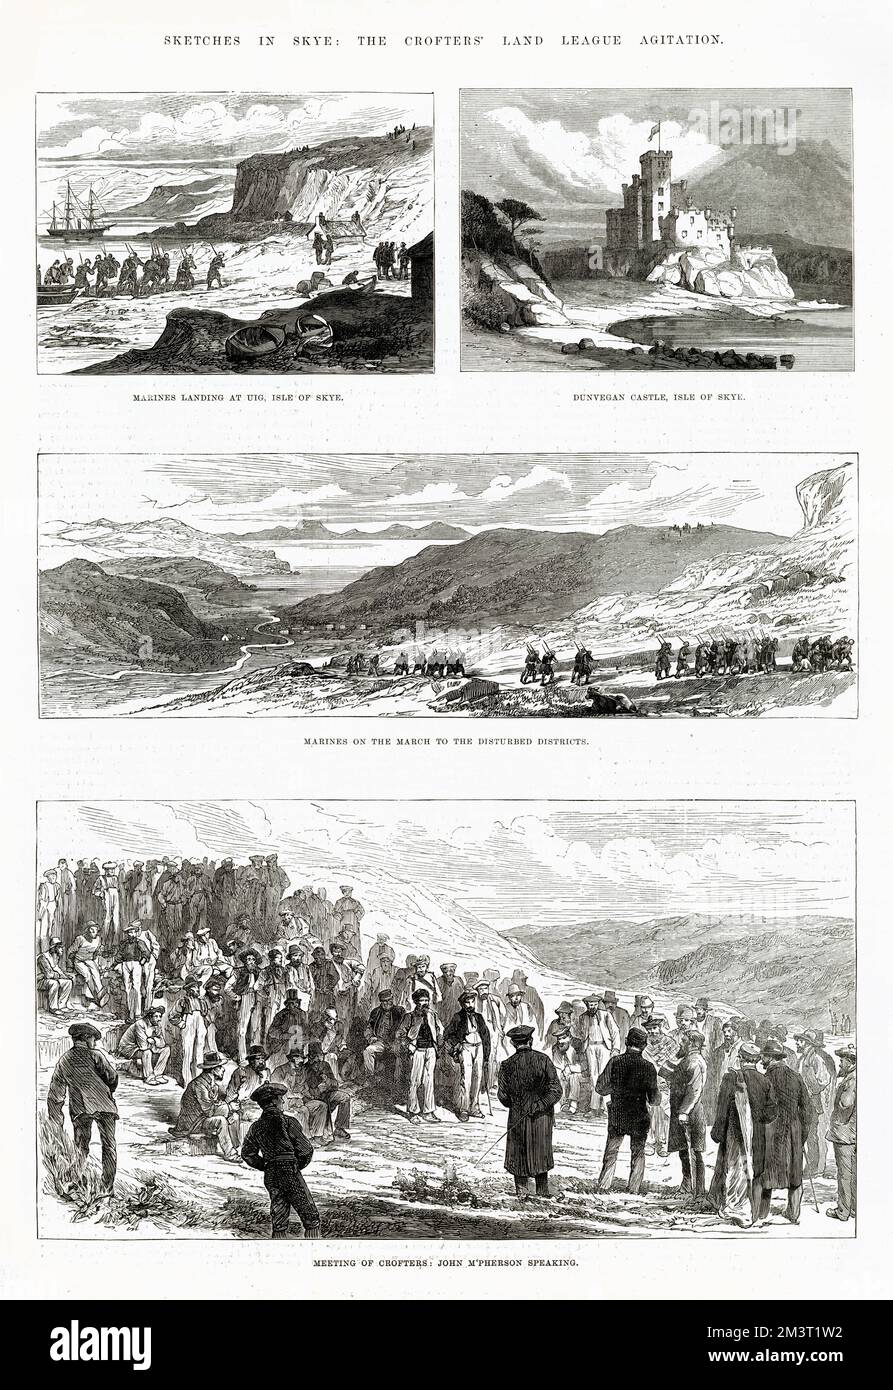 Page from The Illustrated London News reporting on the agitation from the Crofters' Land League Association on the Isle of Skye. Pictures show Marines landing at Uig, Dunvegan Castle, Marines on the march to the disturbed areas and John M'Pherson speaking at a meeting of the crofters. Stock Photo